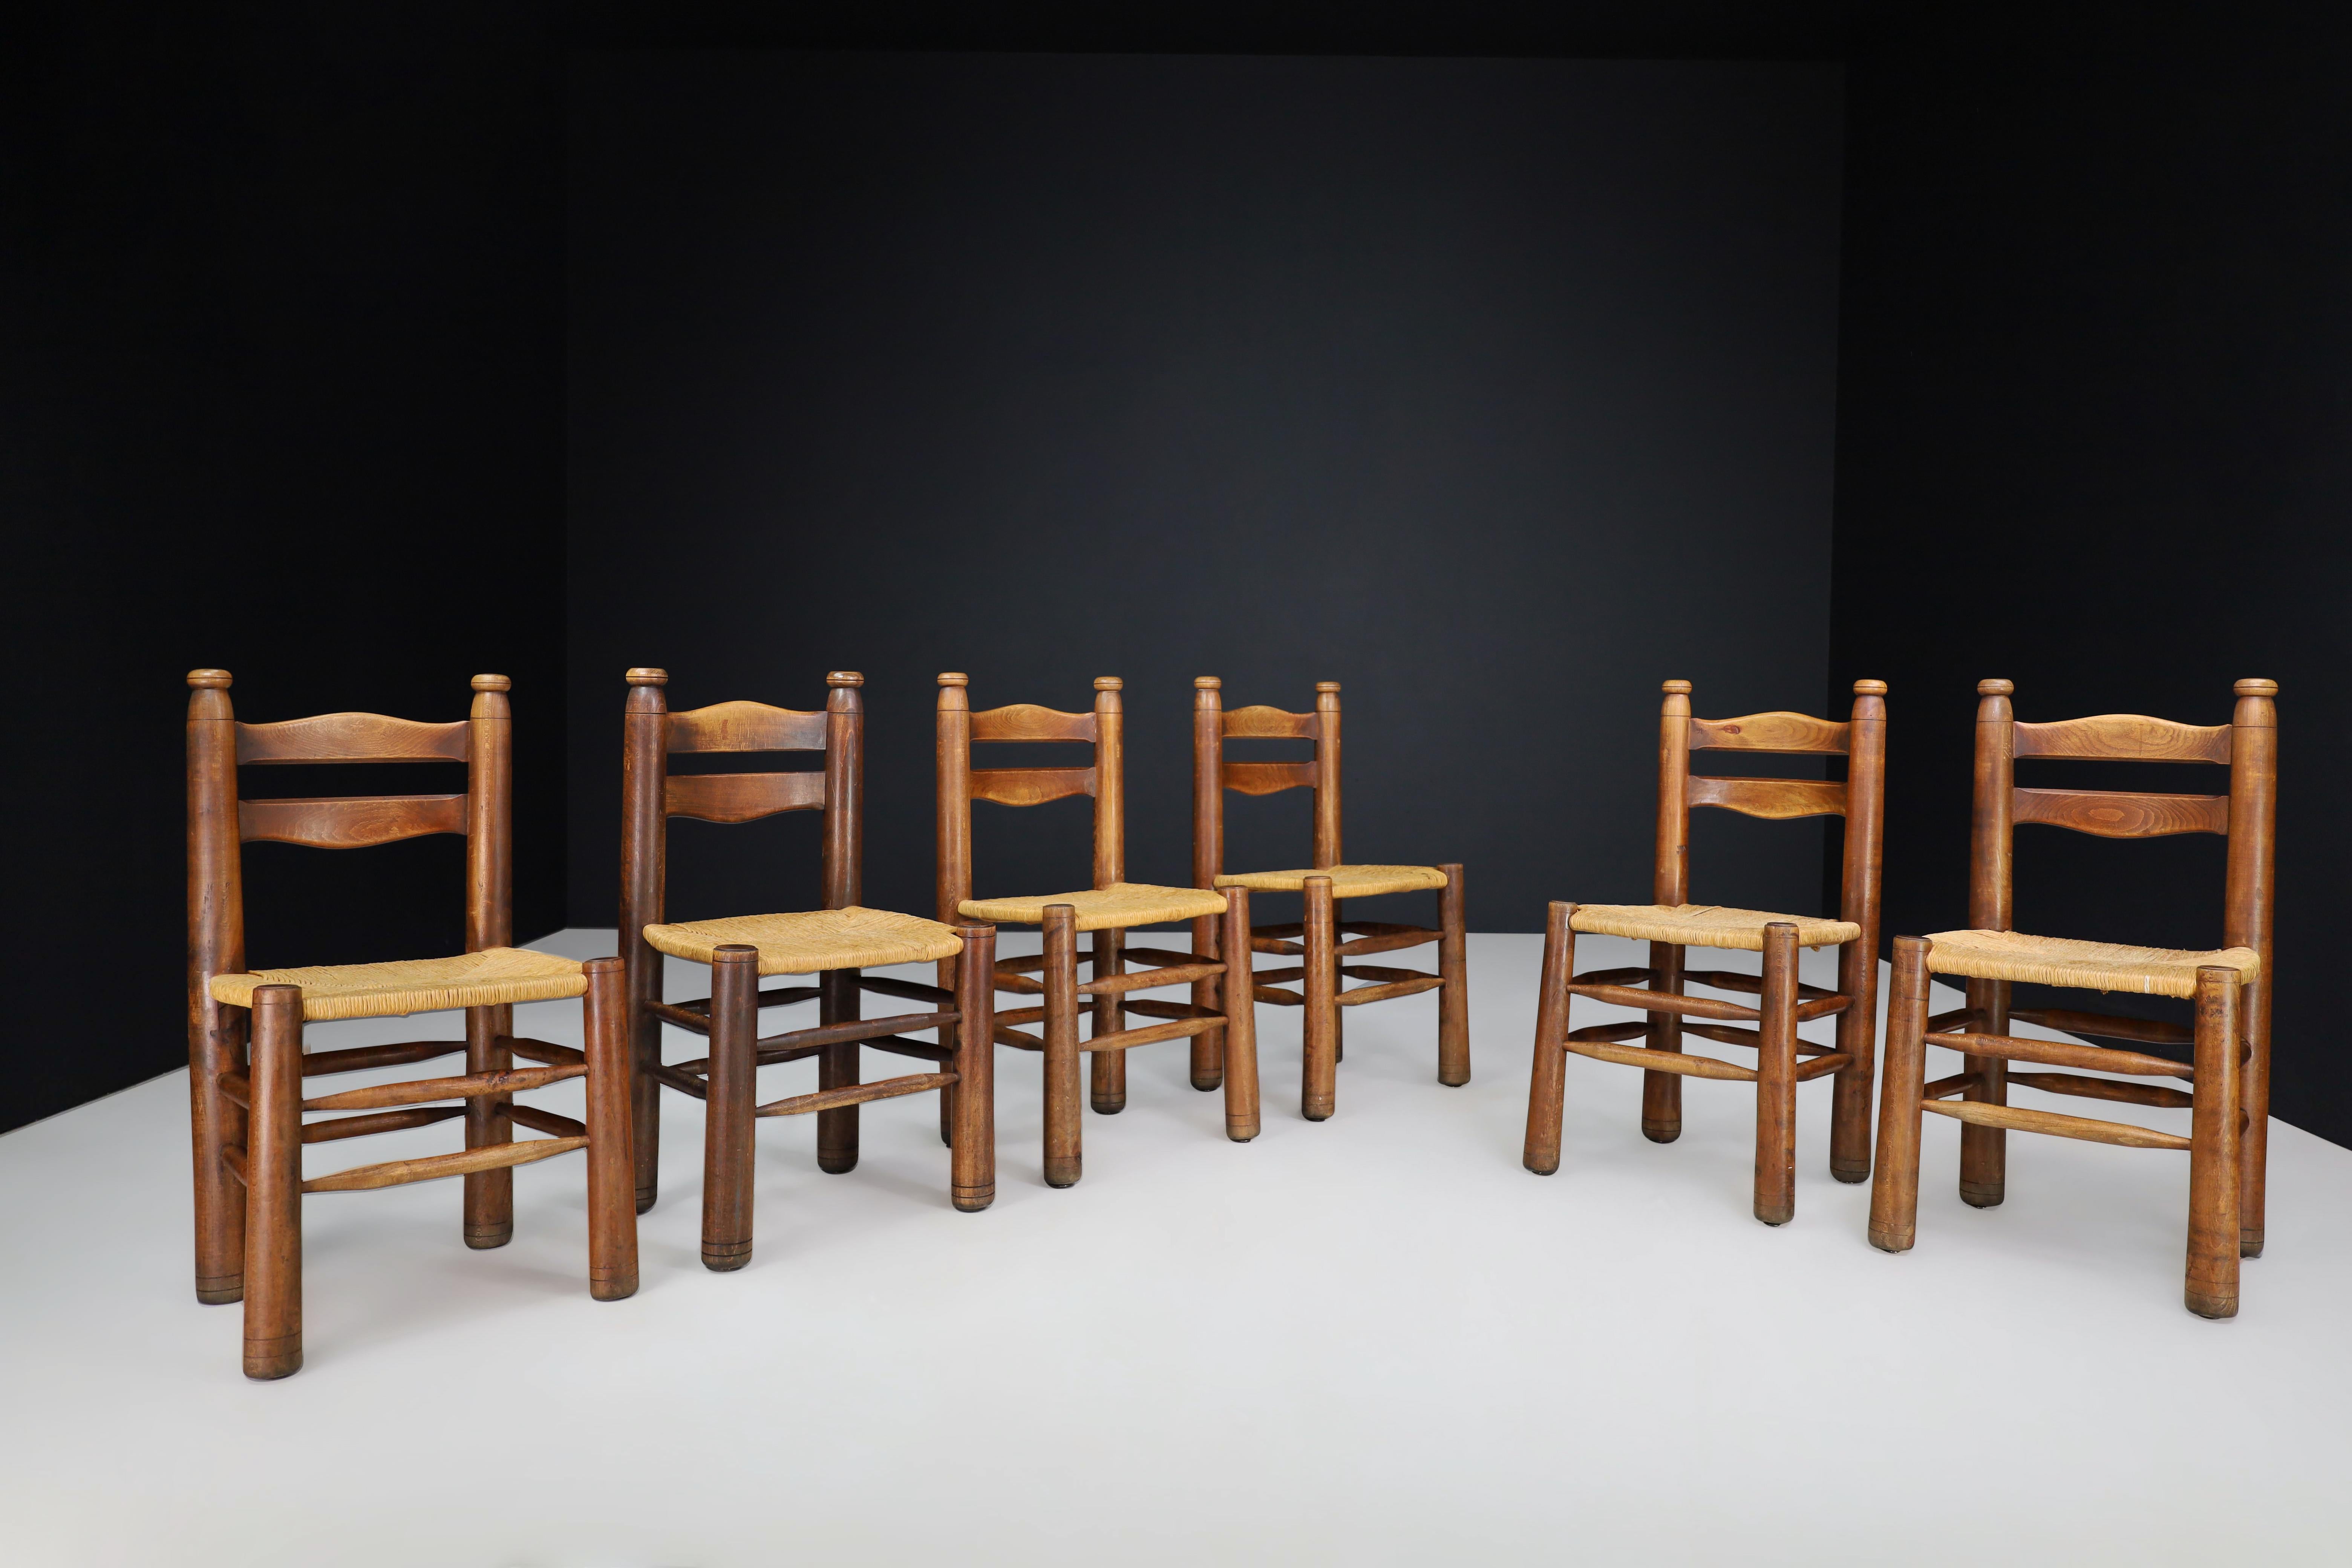 Handcrafted Dining room chairs in wood and rush, France 1940s

These handcrafted dining room chairs are crafted from rustic wood and rush in the style of Charles Dudouyt, dating back to 1940s France. The set includes eight chairs in excellent